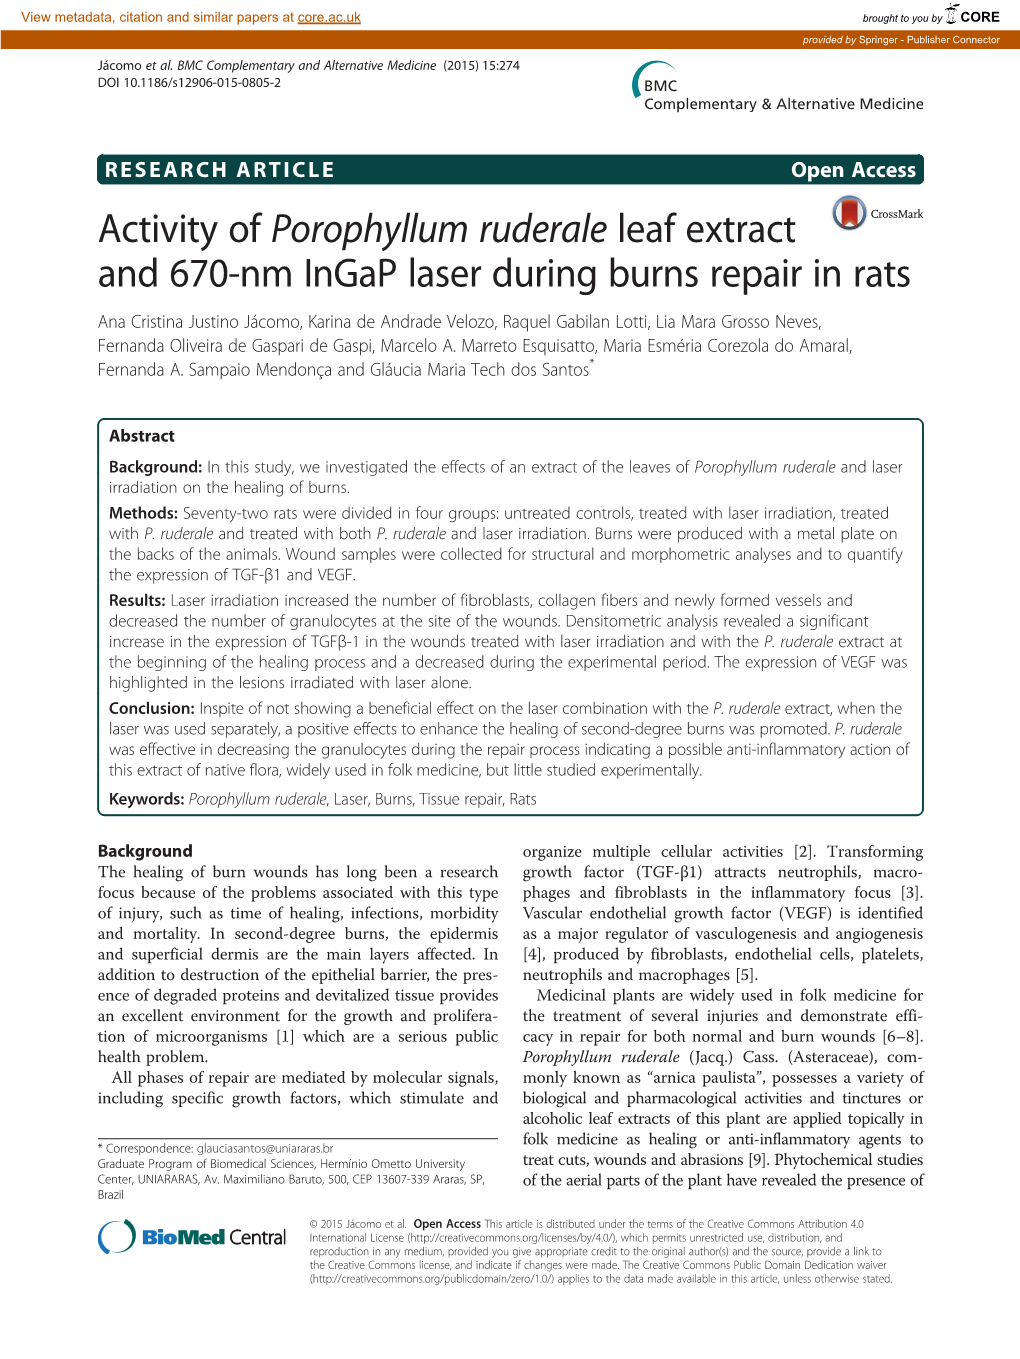 Activity of Porophyllum Ruderale Leaf Extract and 670-Nm Ingap Laser